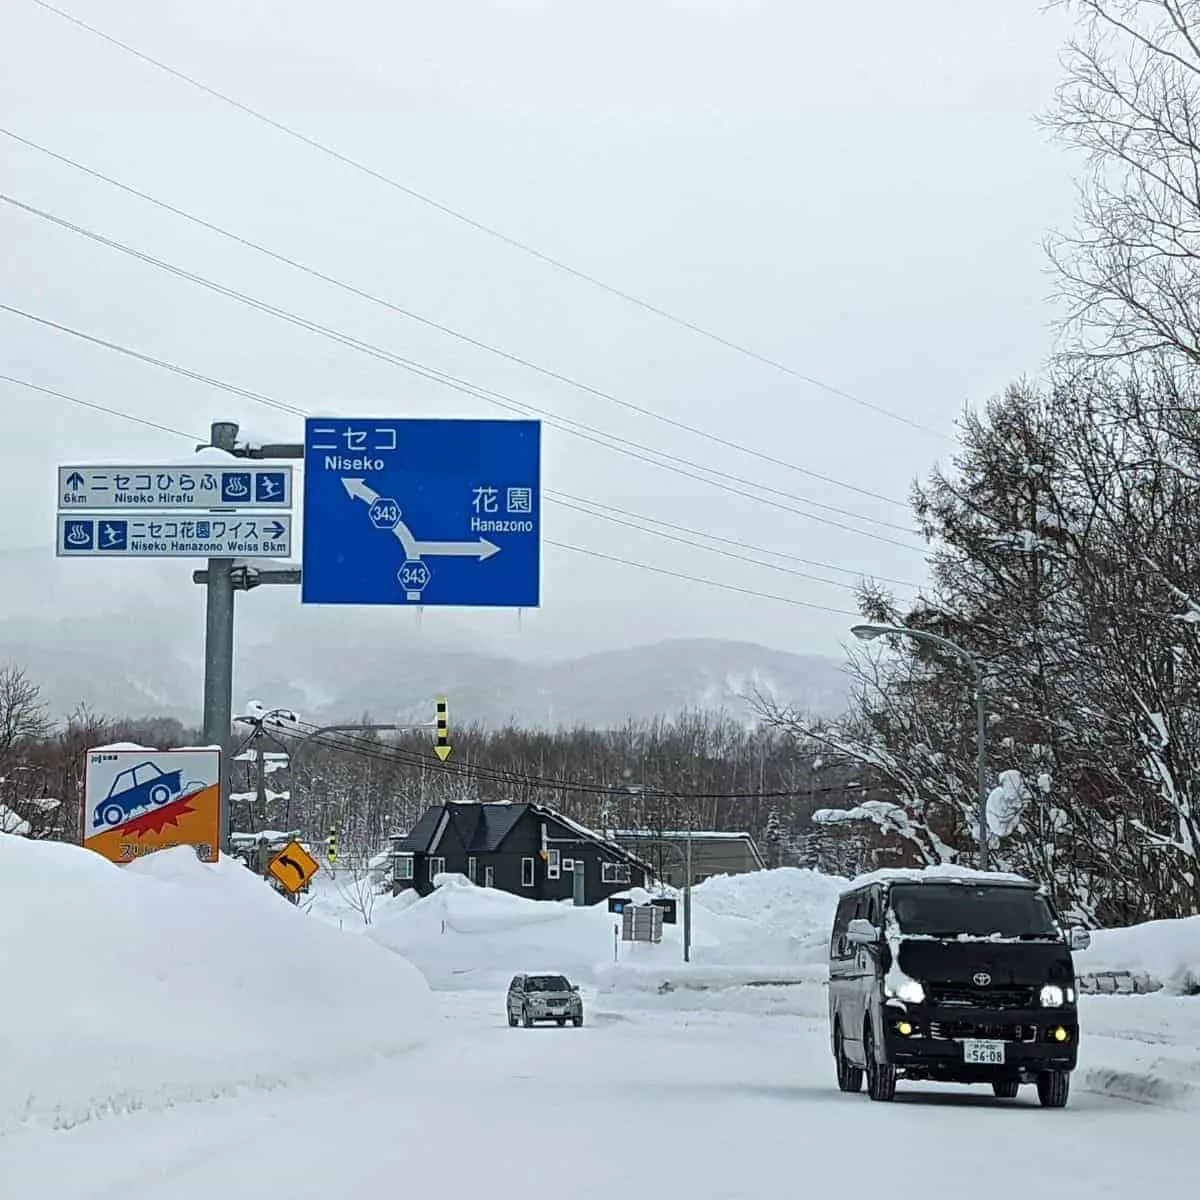 Our Favourite Way to Get to Niseko